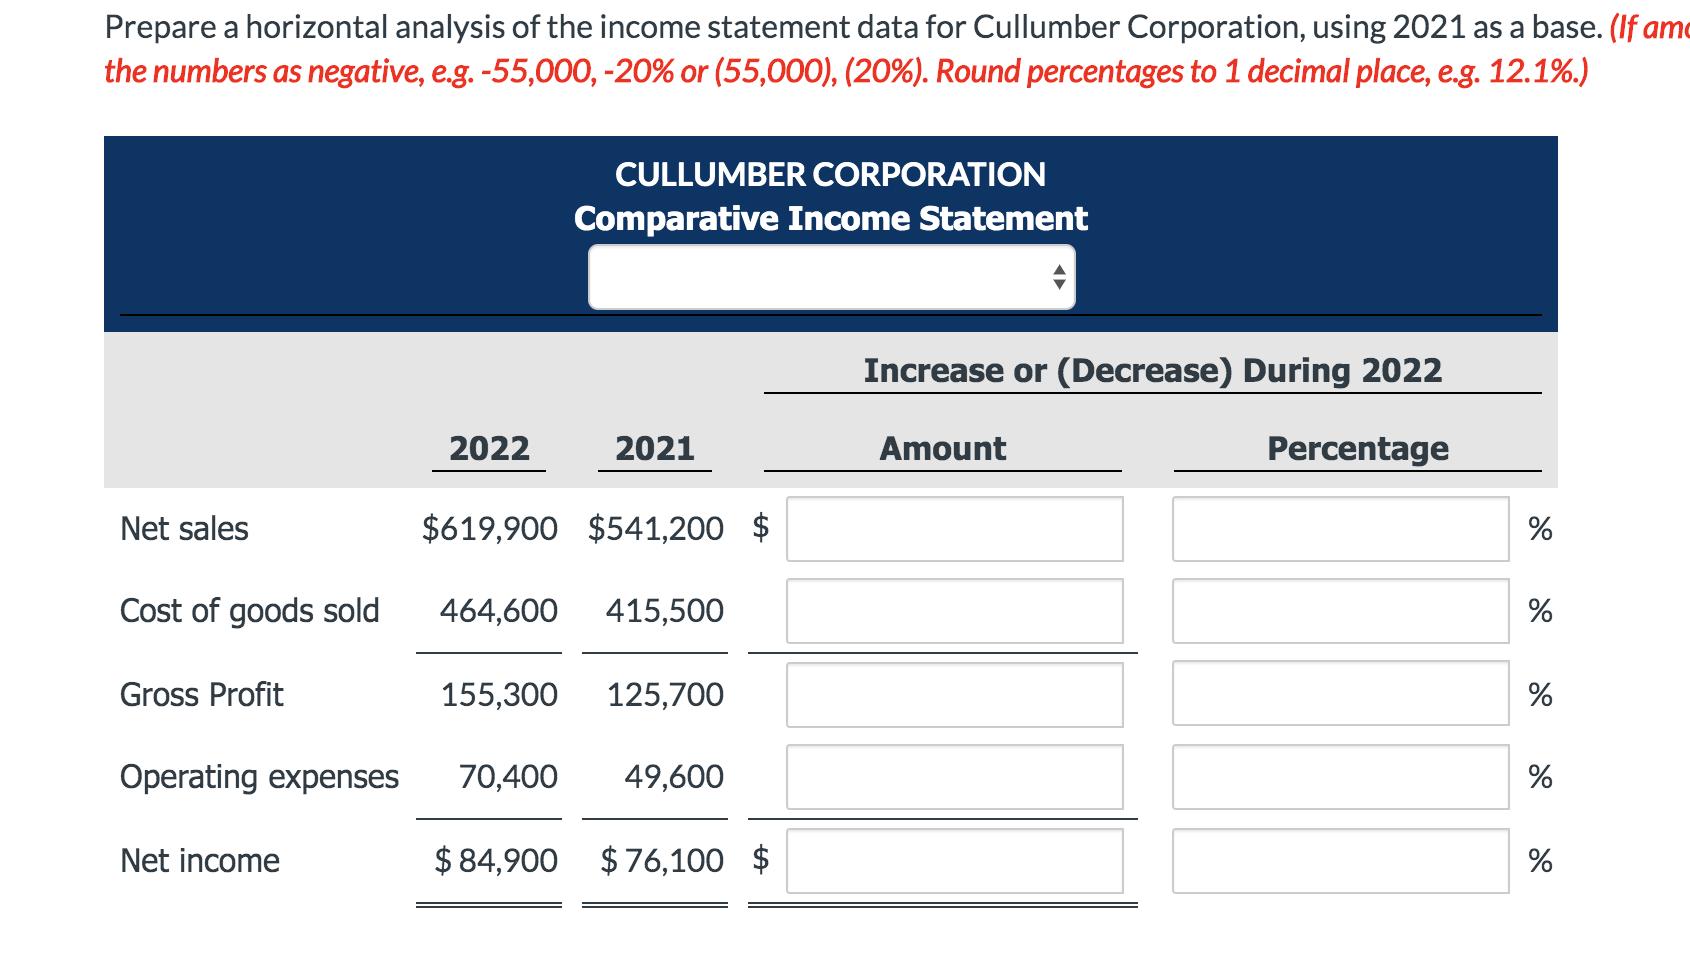 Prepare a horizontal analysis of the income statement data for Cullumber Corporation, using 2021 as a base. (If amo the numbe